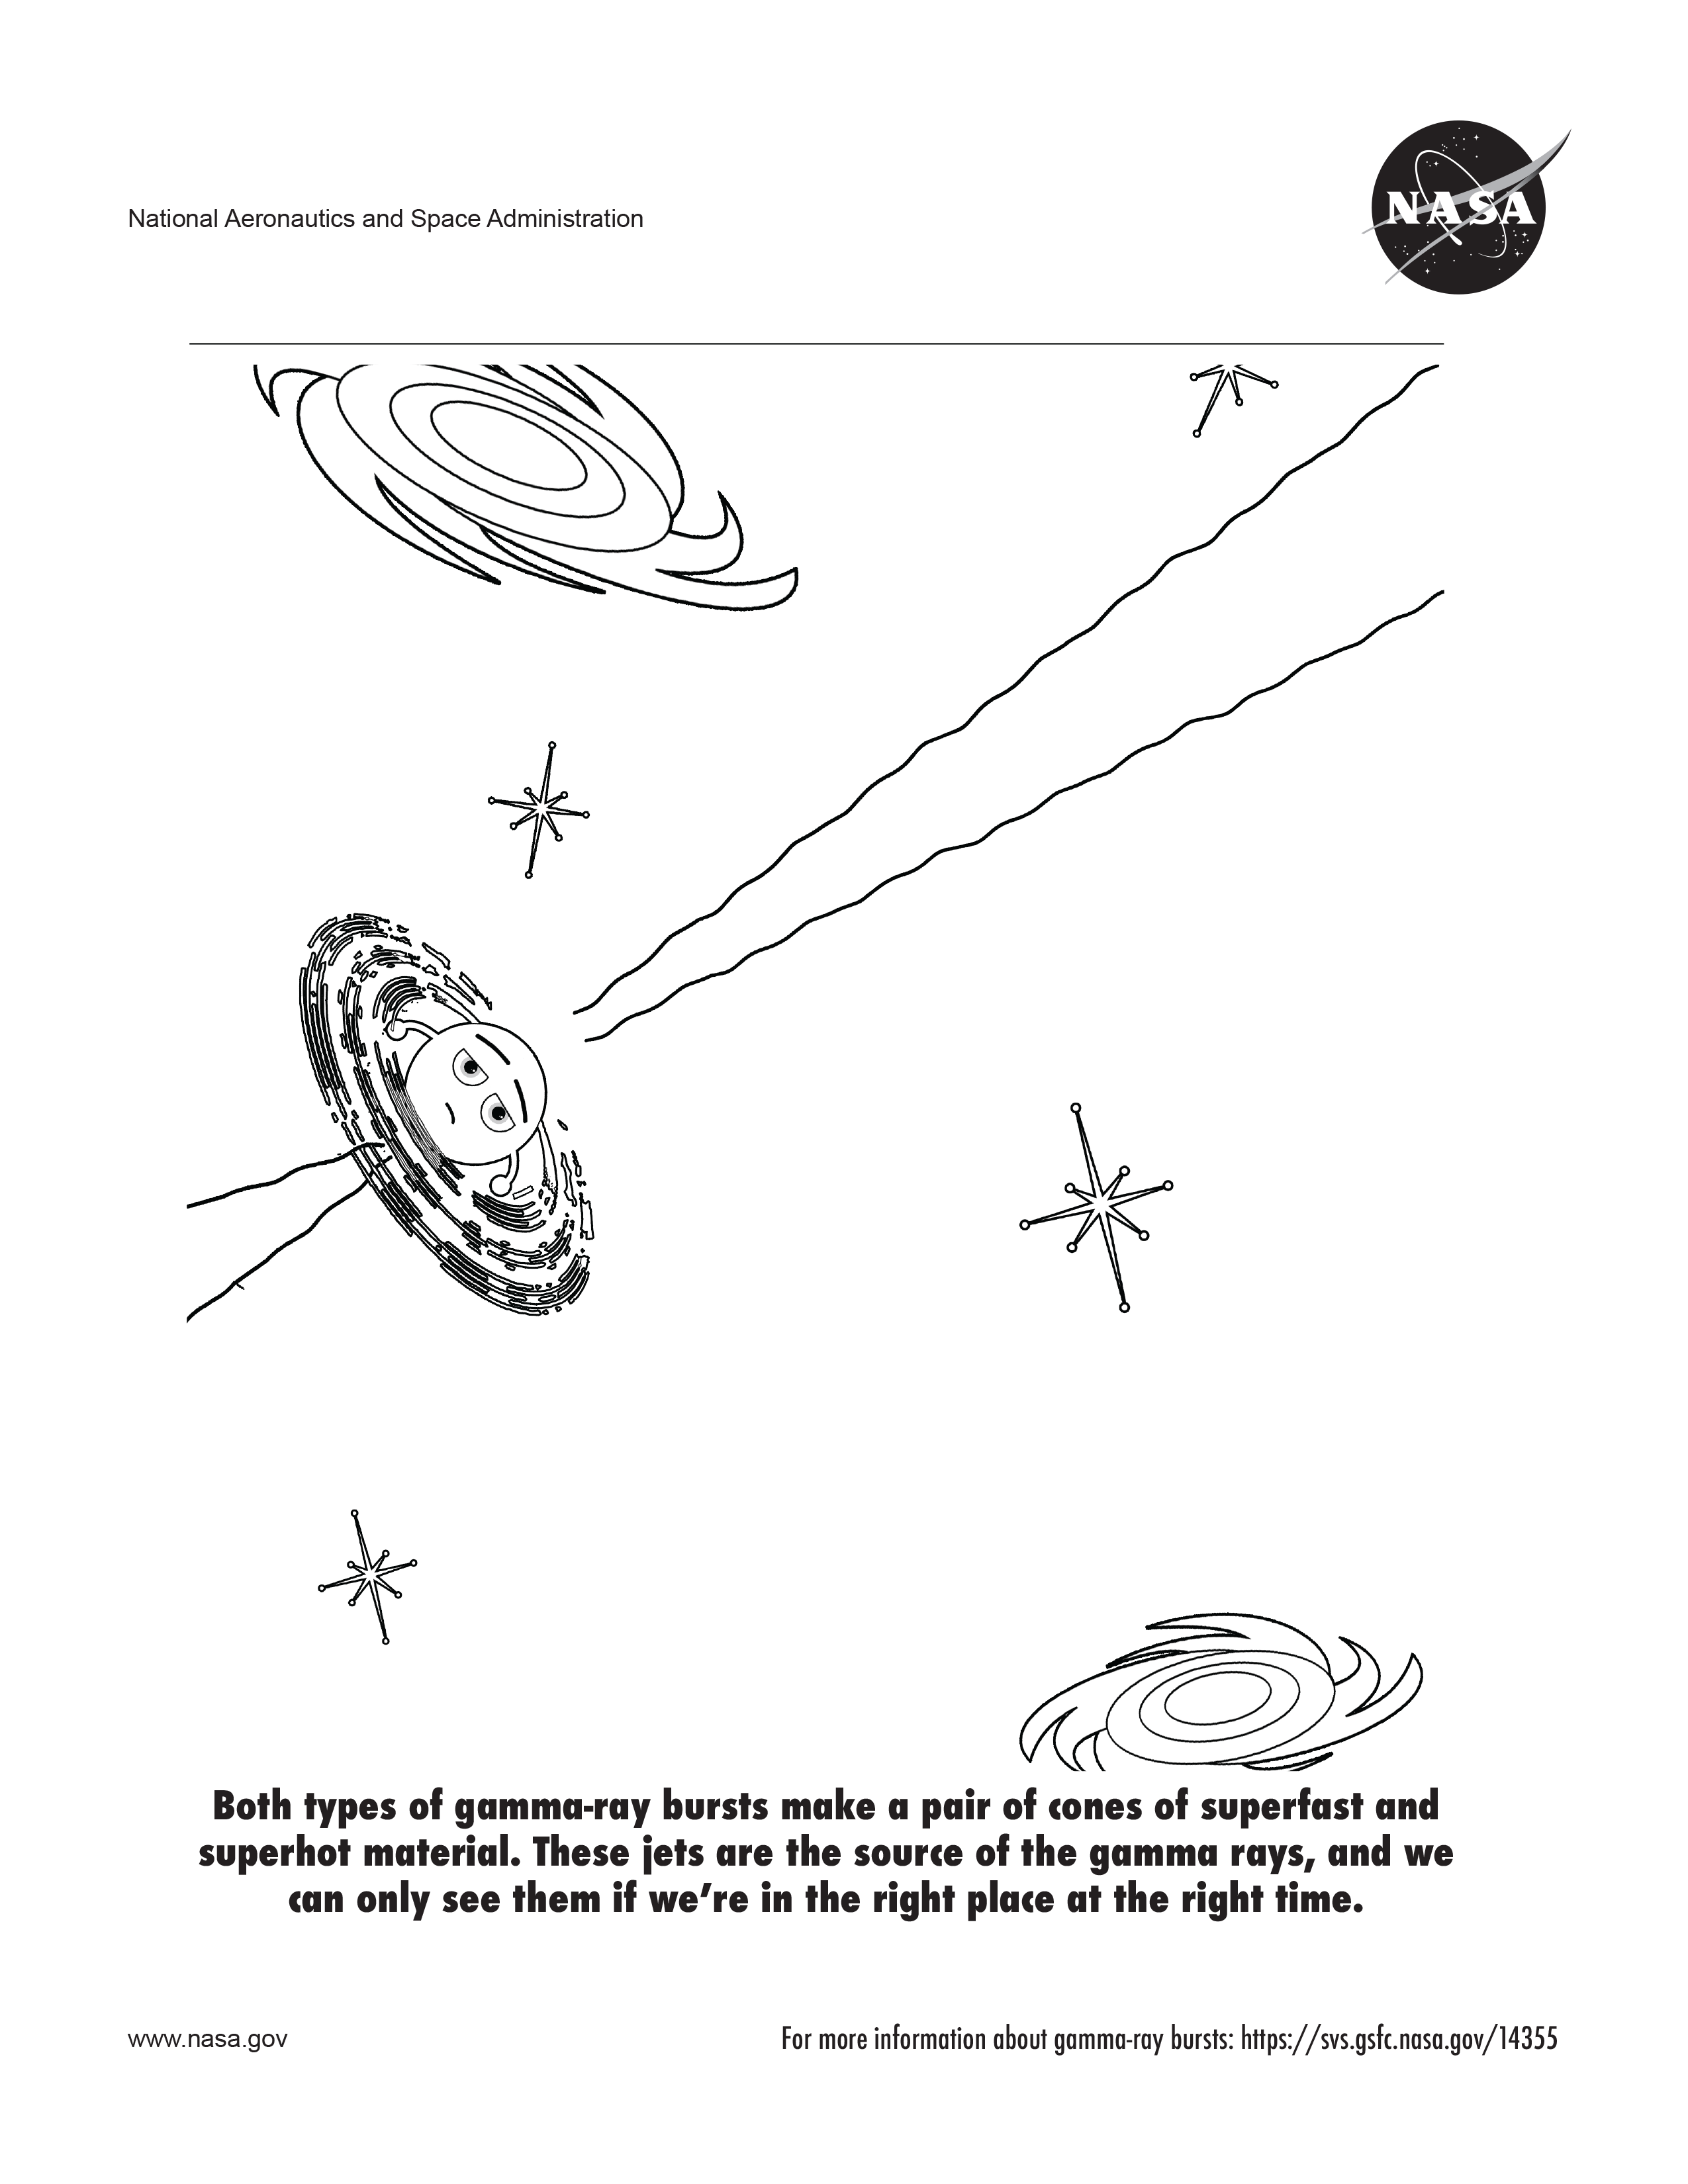 Page 4 - Gamma-ray bursts can be seen from a long way away